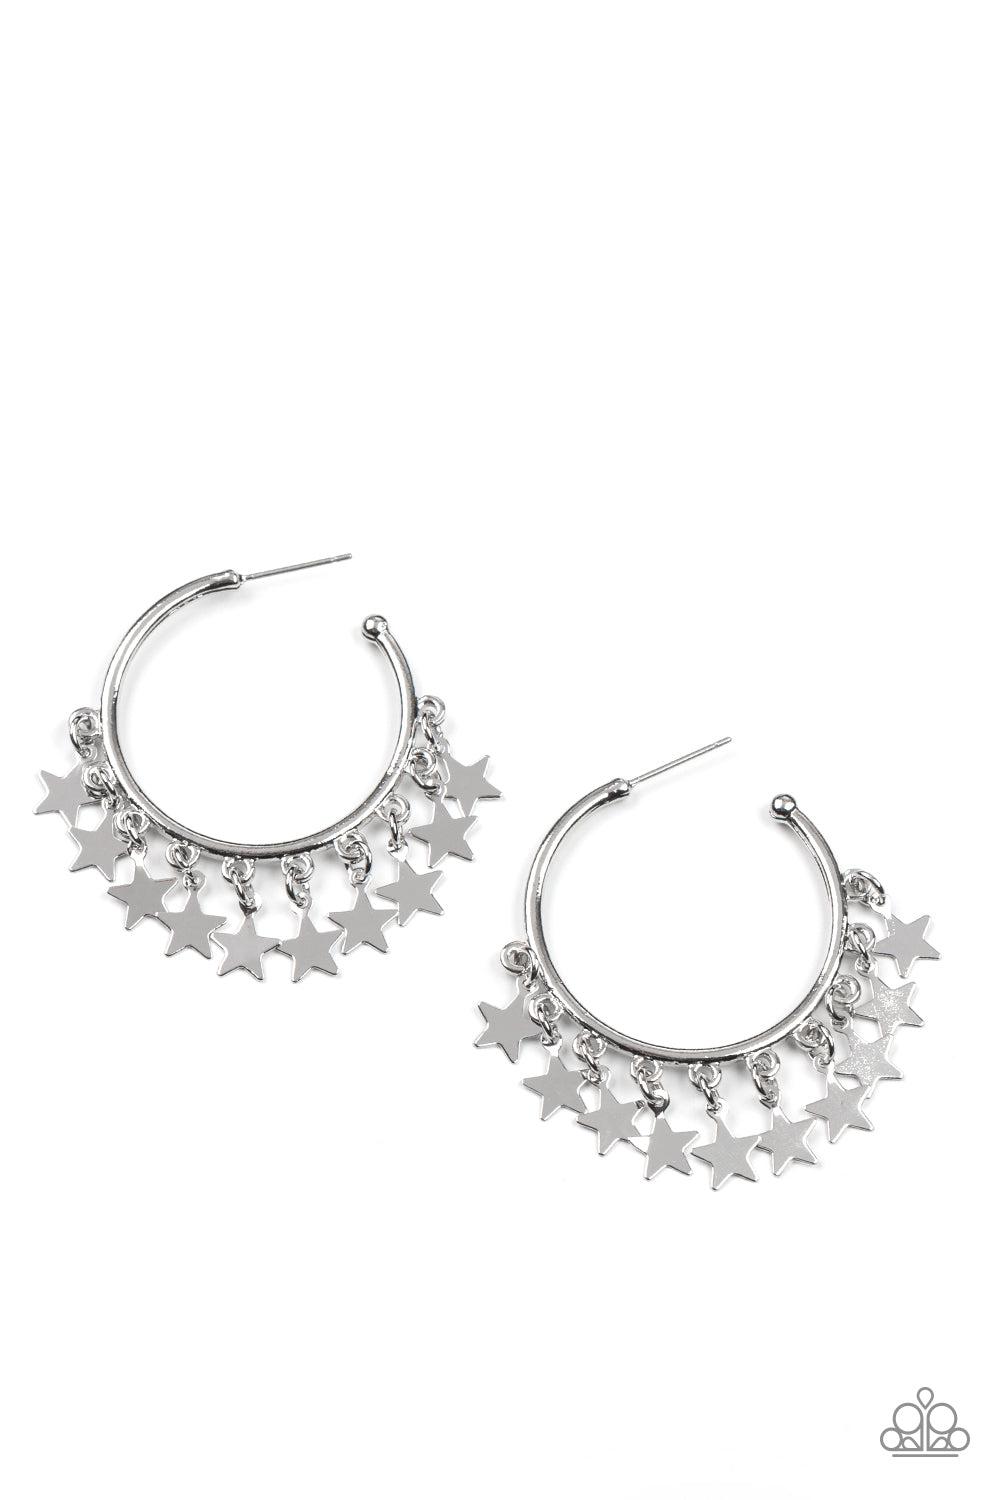 Happy Independence Day Silver Star Hoop Earrings - Paparazzi Accessories- lightbox - CarasShop.com - $5 Jewelry by Cara Jewels